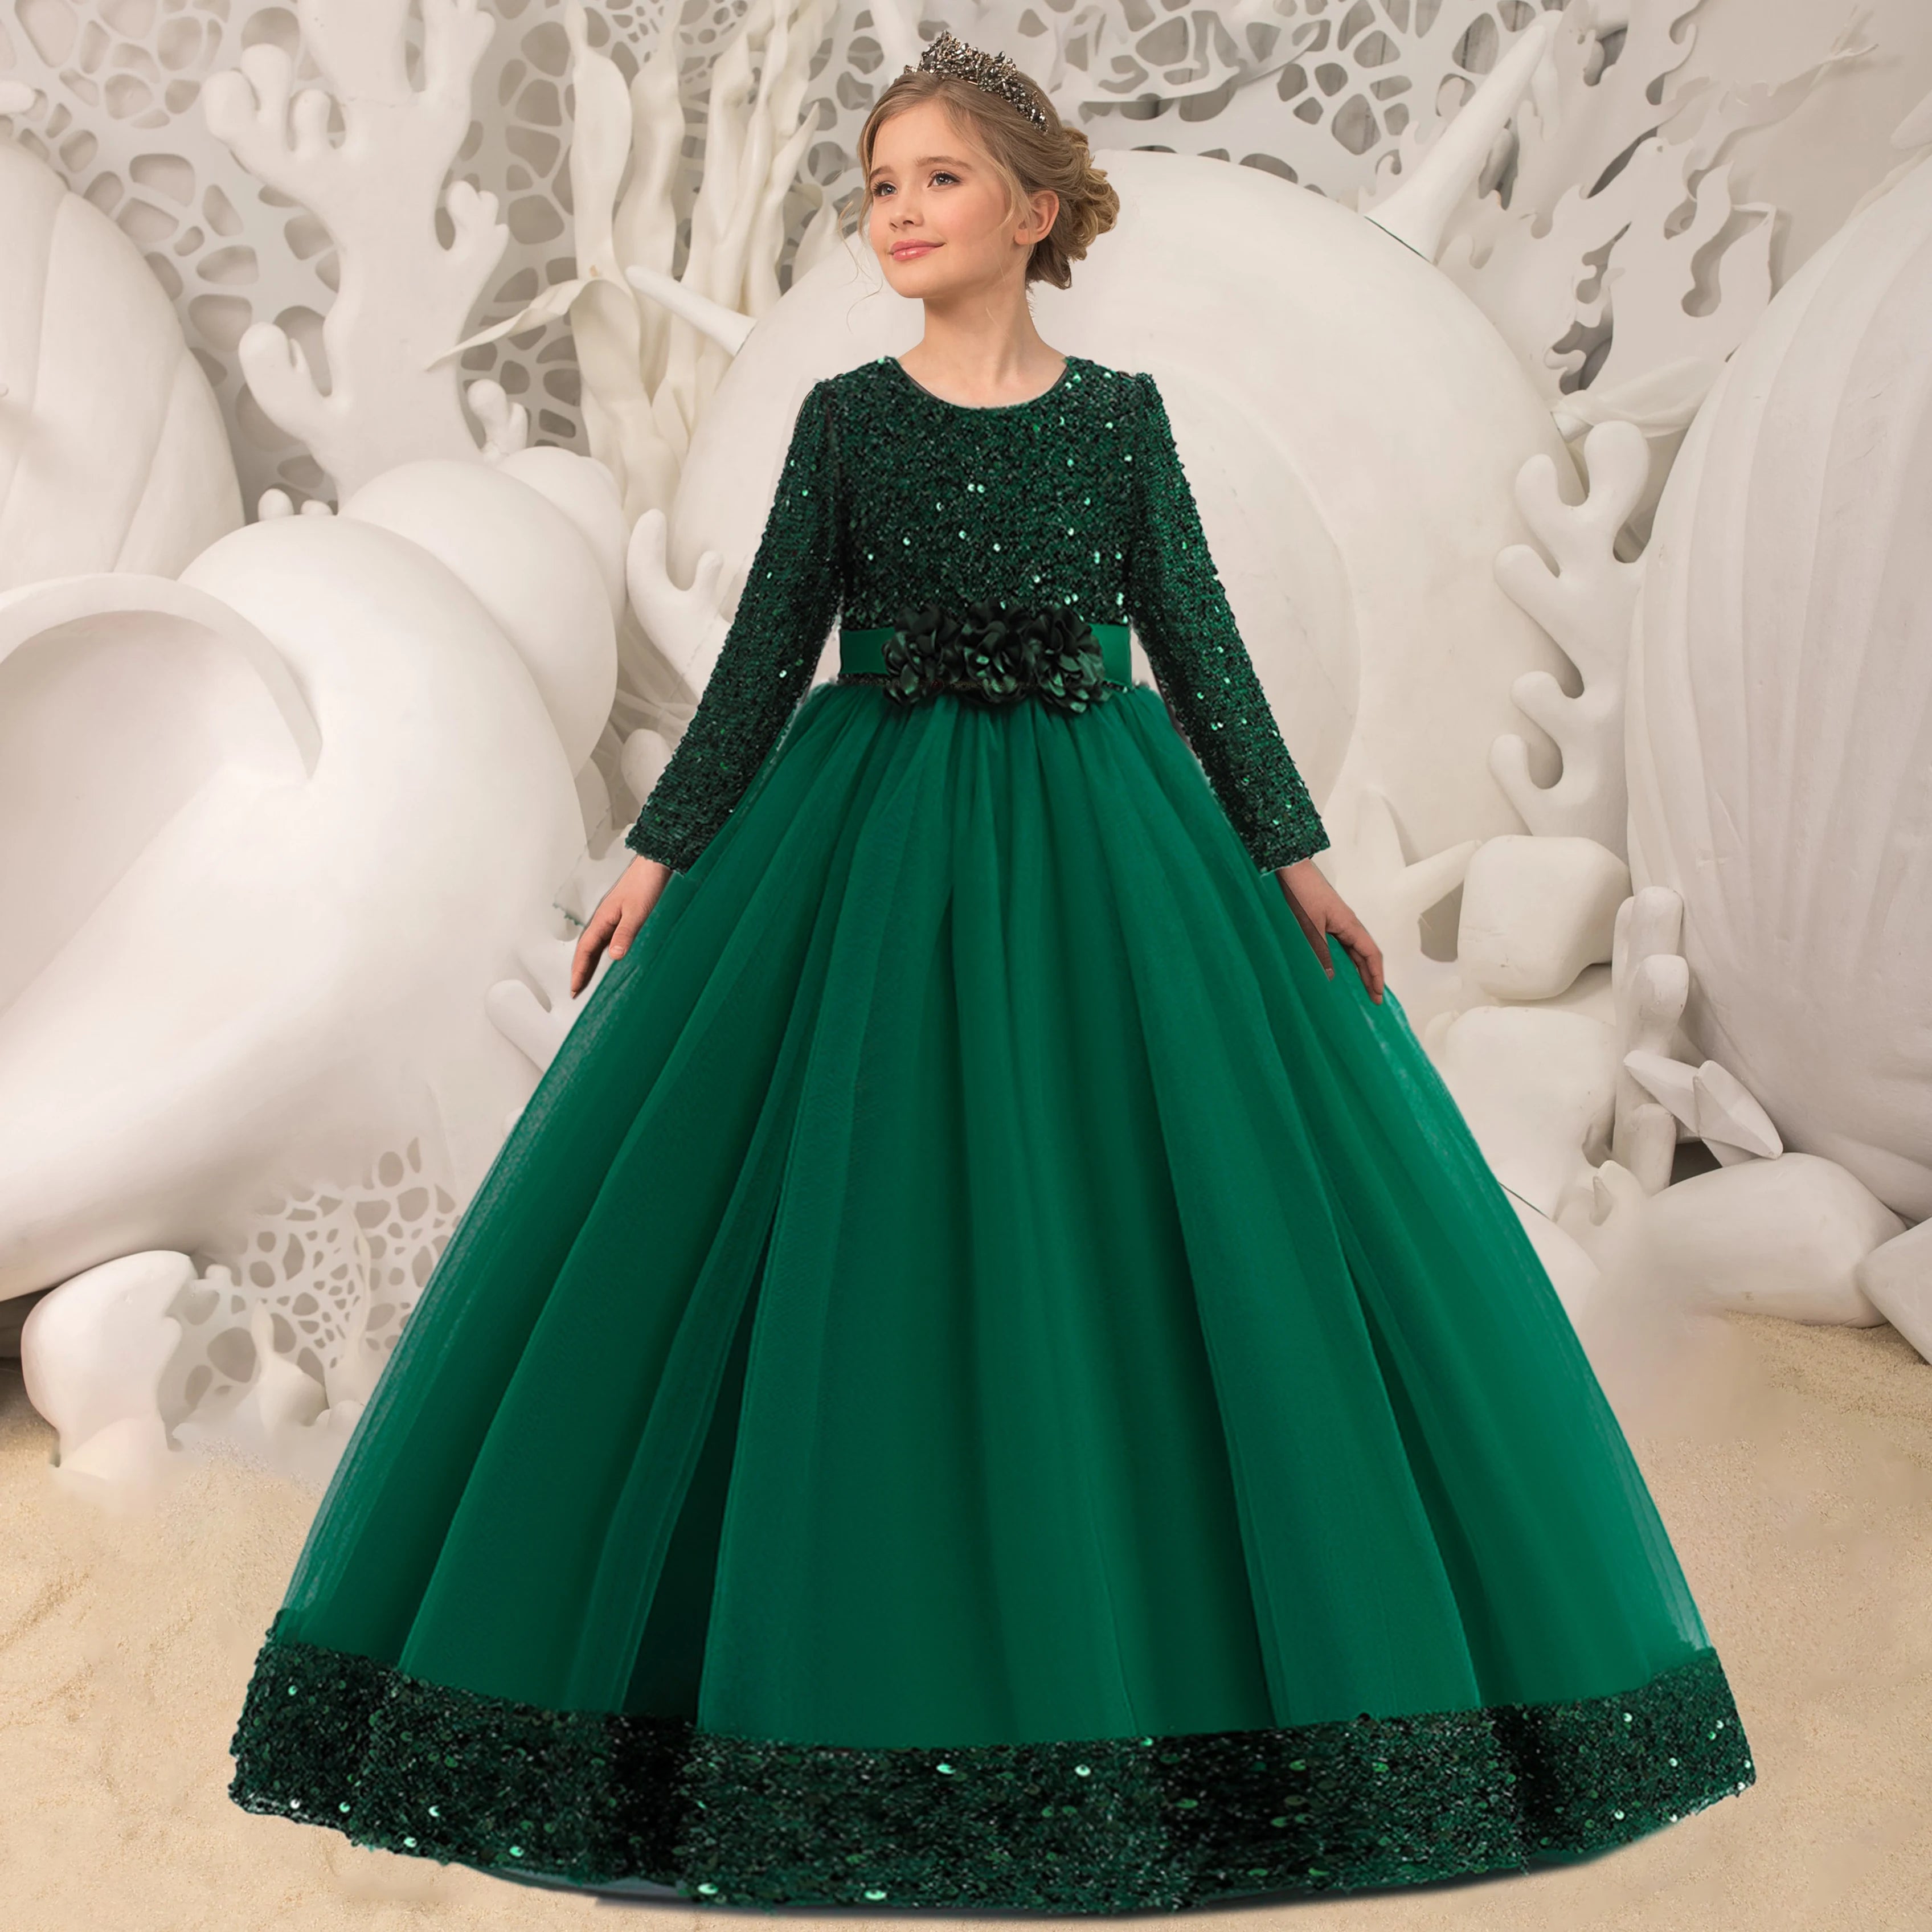 Sequin Christmas Kids Party Dresses For Girls Bride maid Costume Flower Long Sleeve Princess Dress Wedding Evening Gown women prom - women contemporary